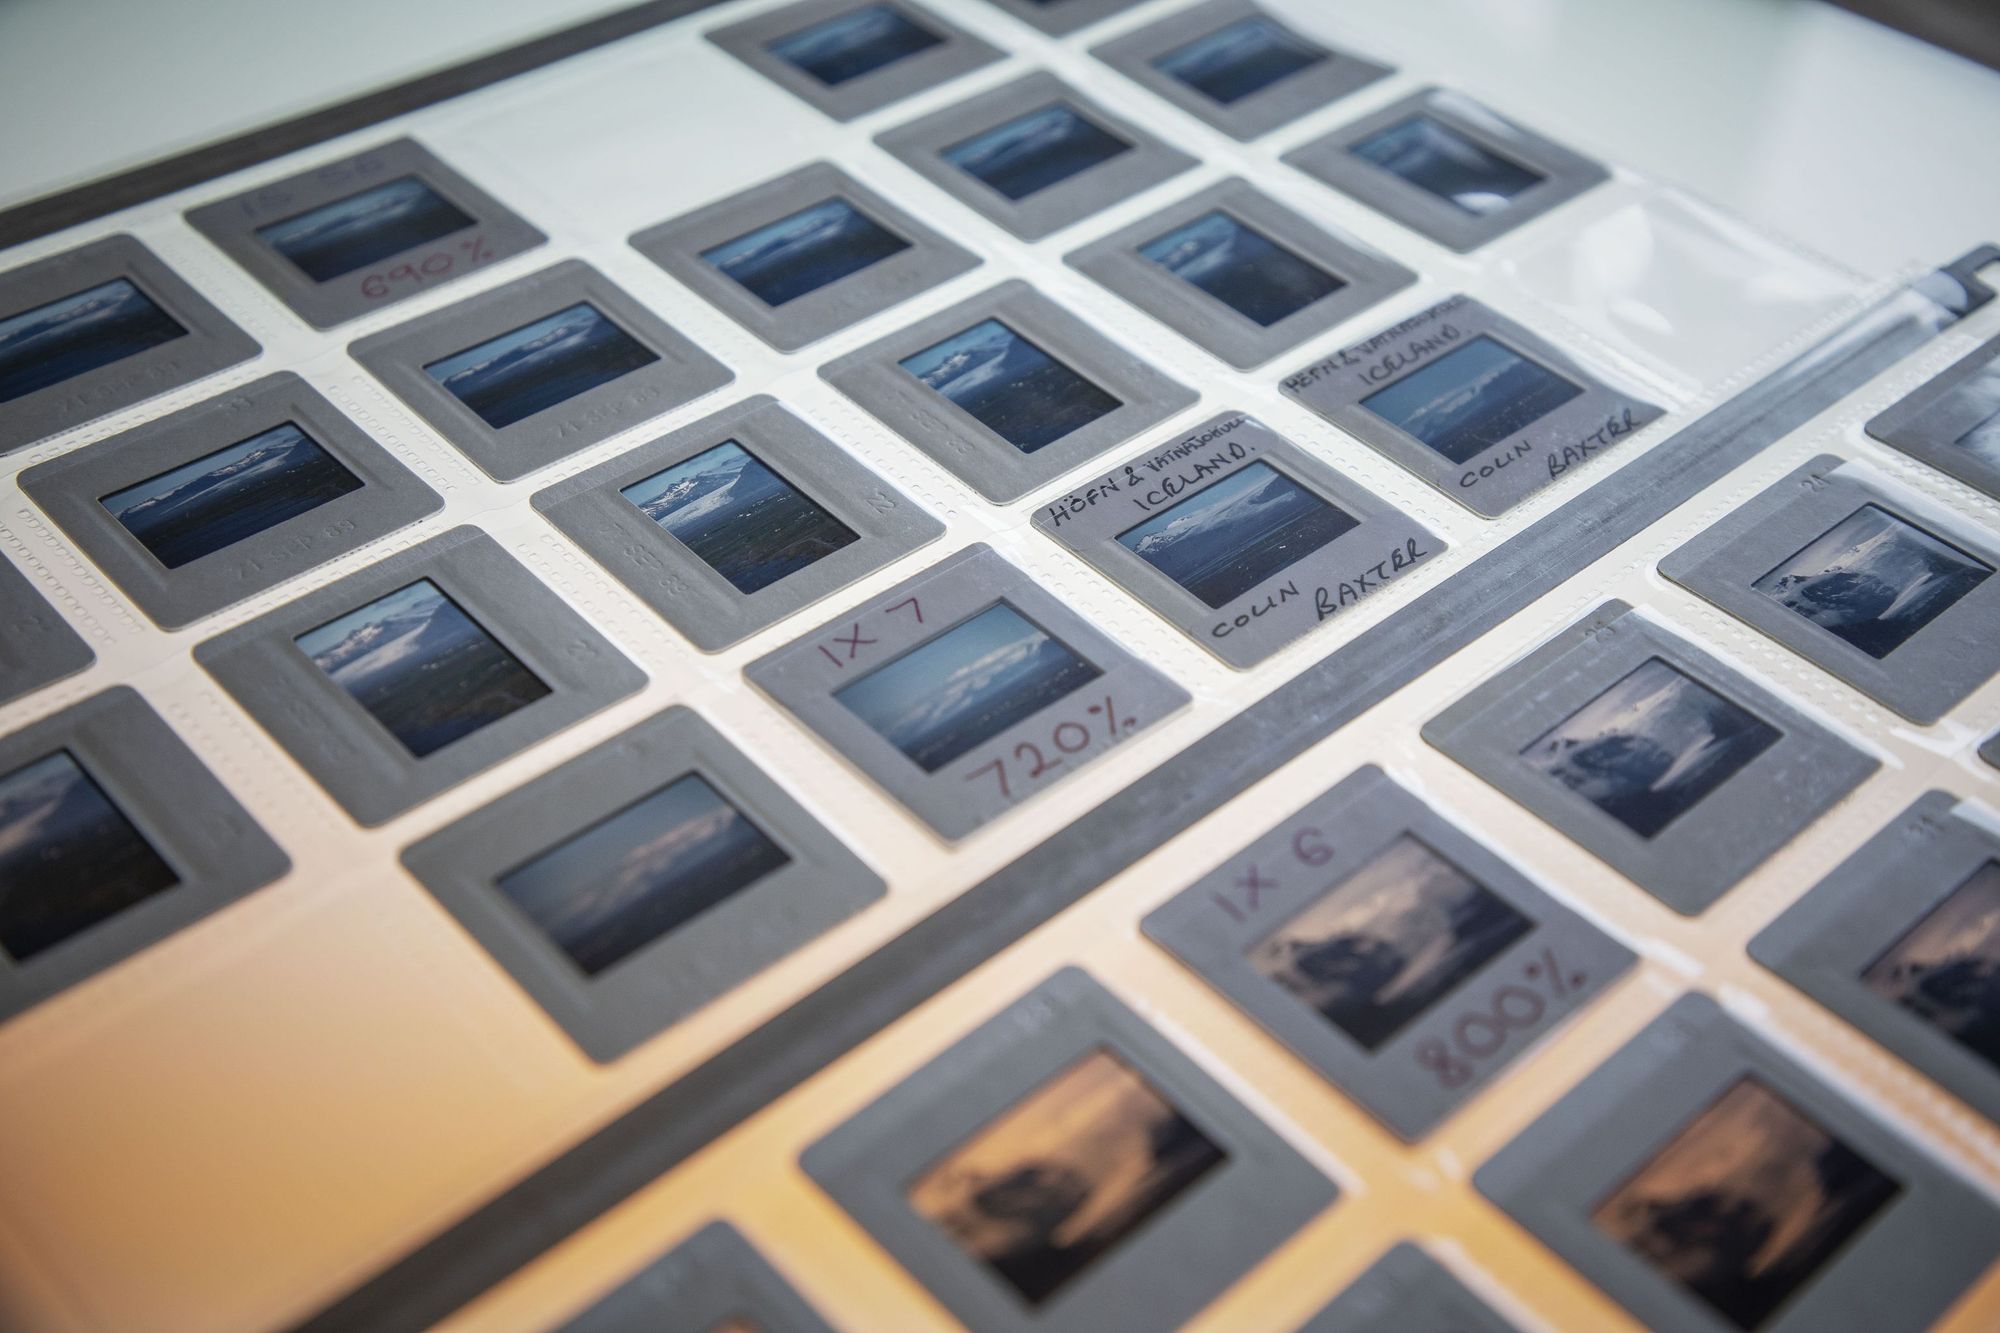 Photographic slides of Icelandic landscapes taken by Colin Baxter in the 80s and 90s.